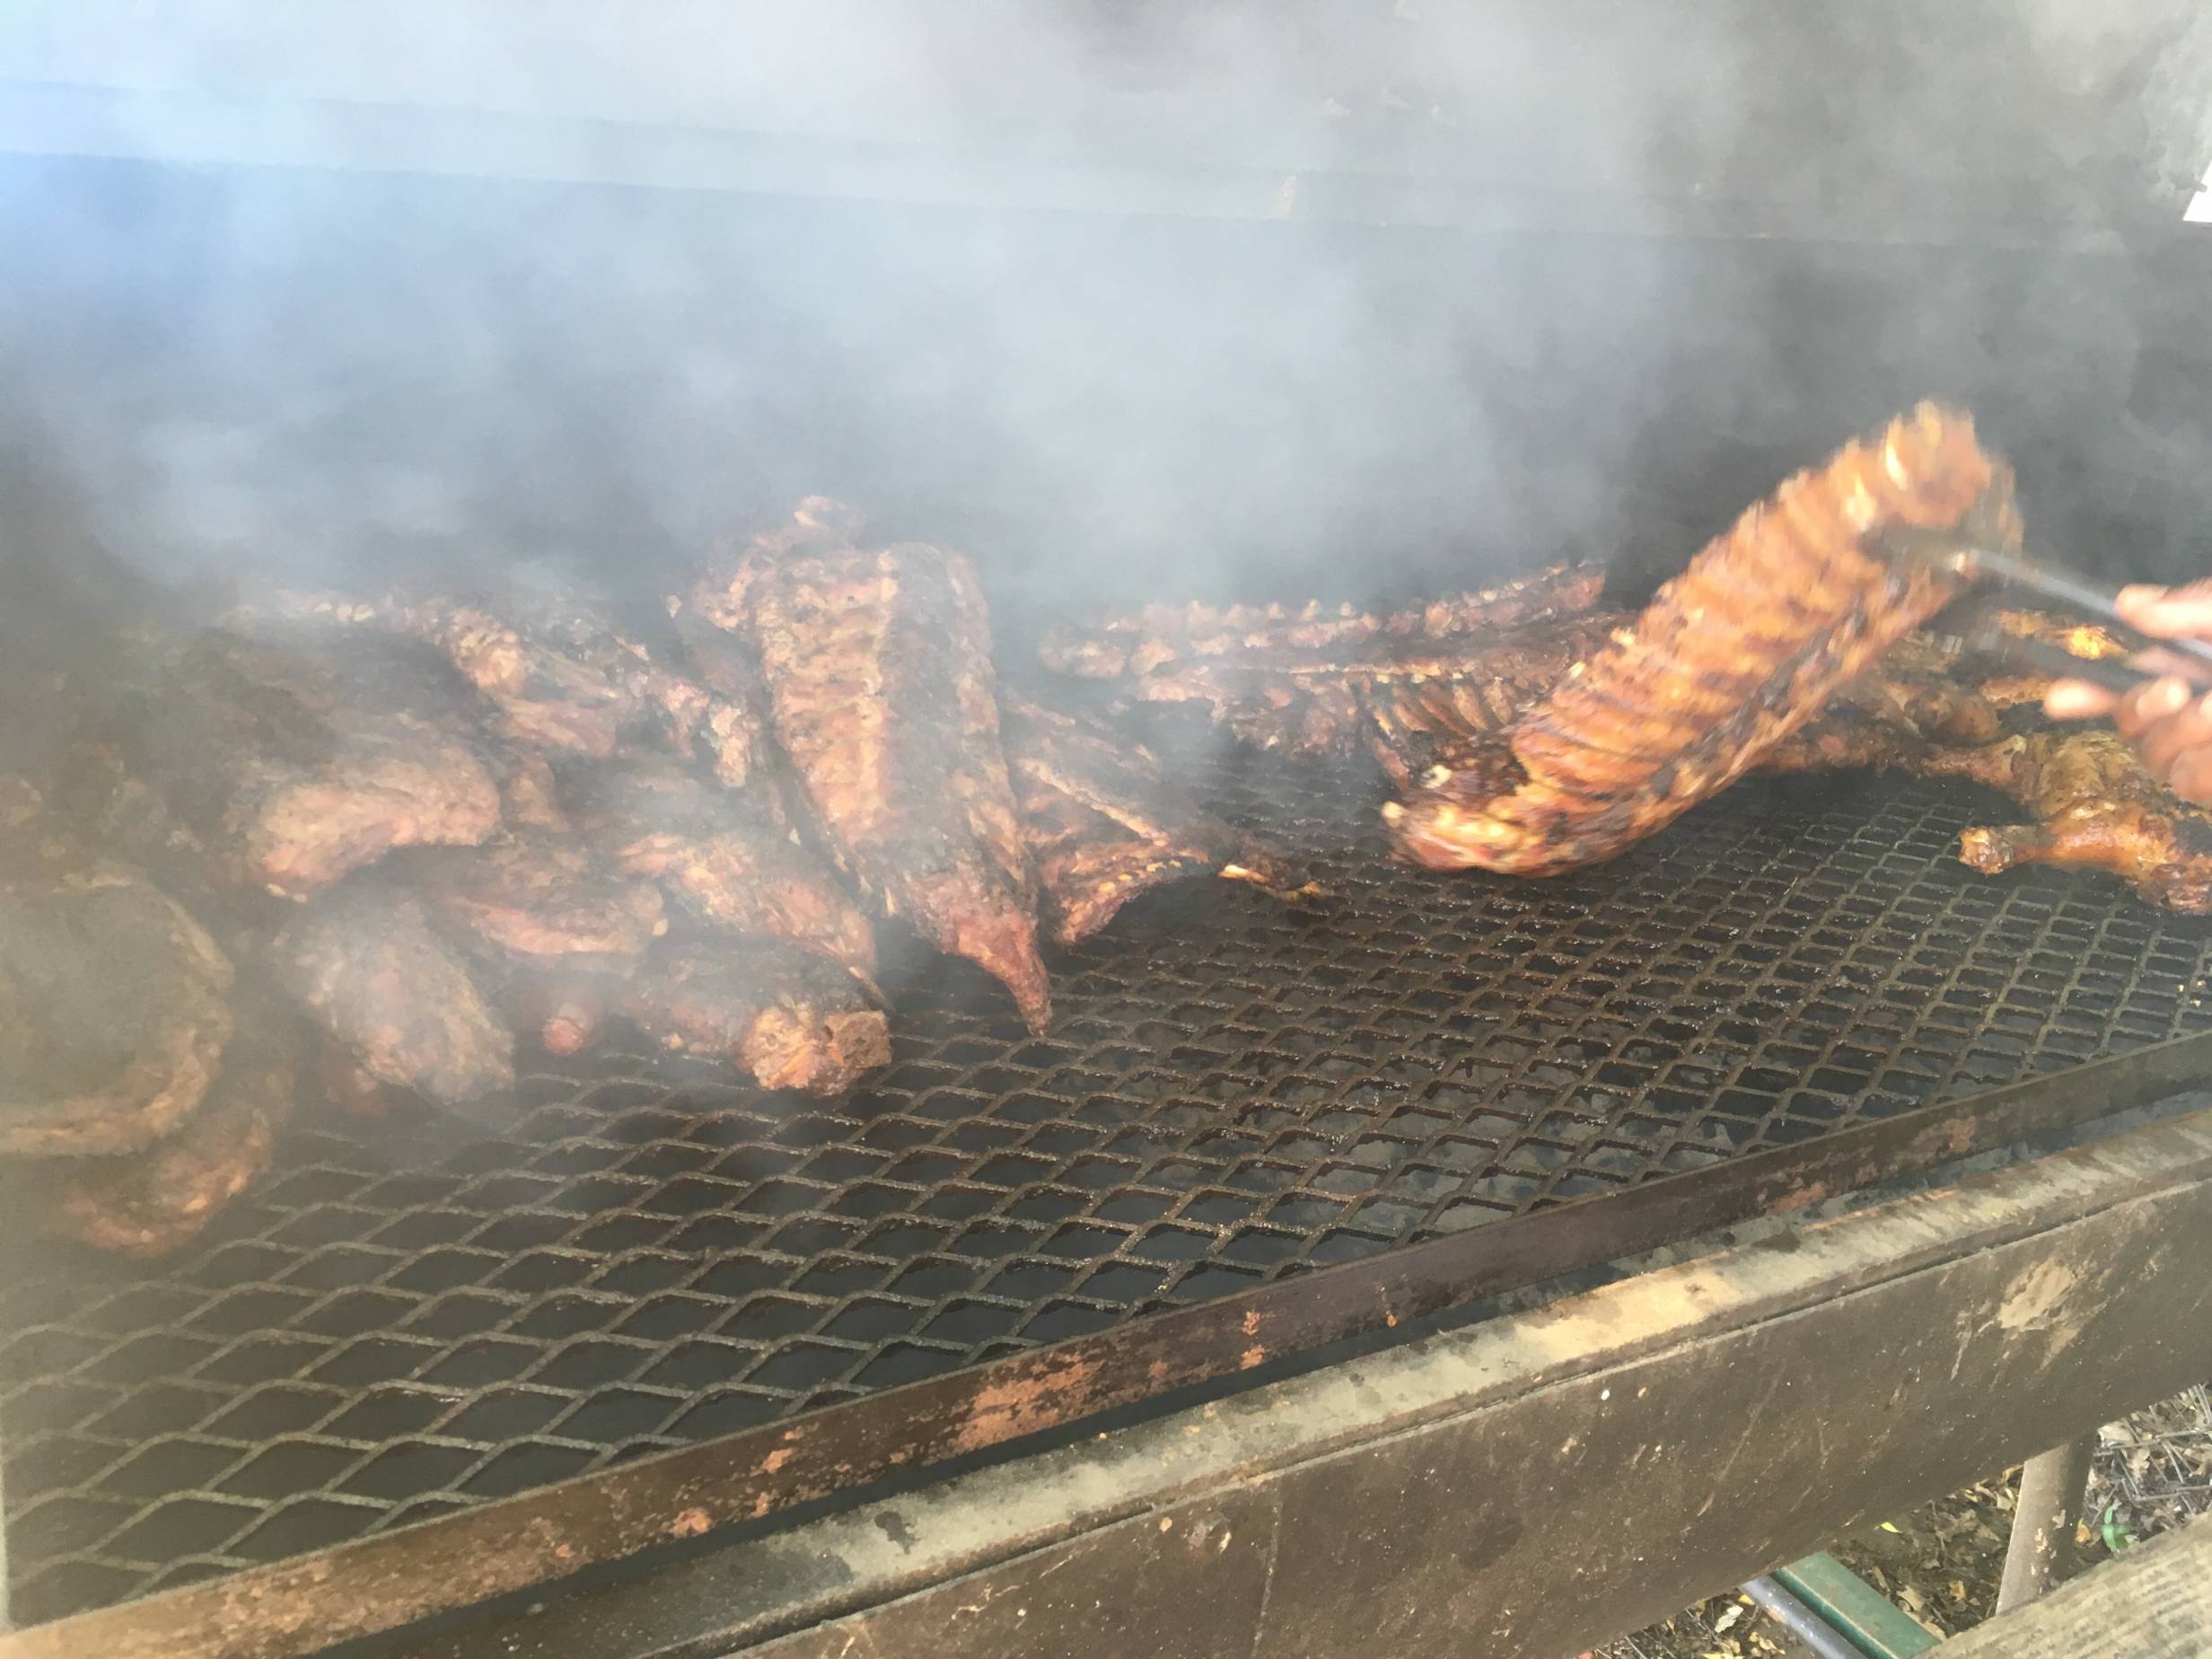 Here’s a secret BBQ joint in Urbana that you might consider this weekend